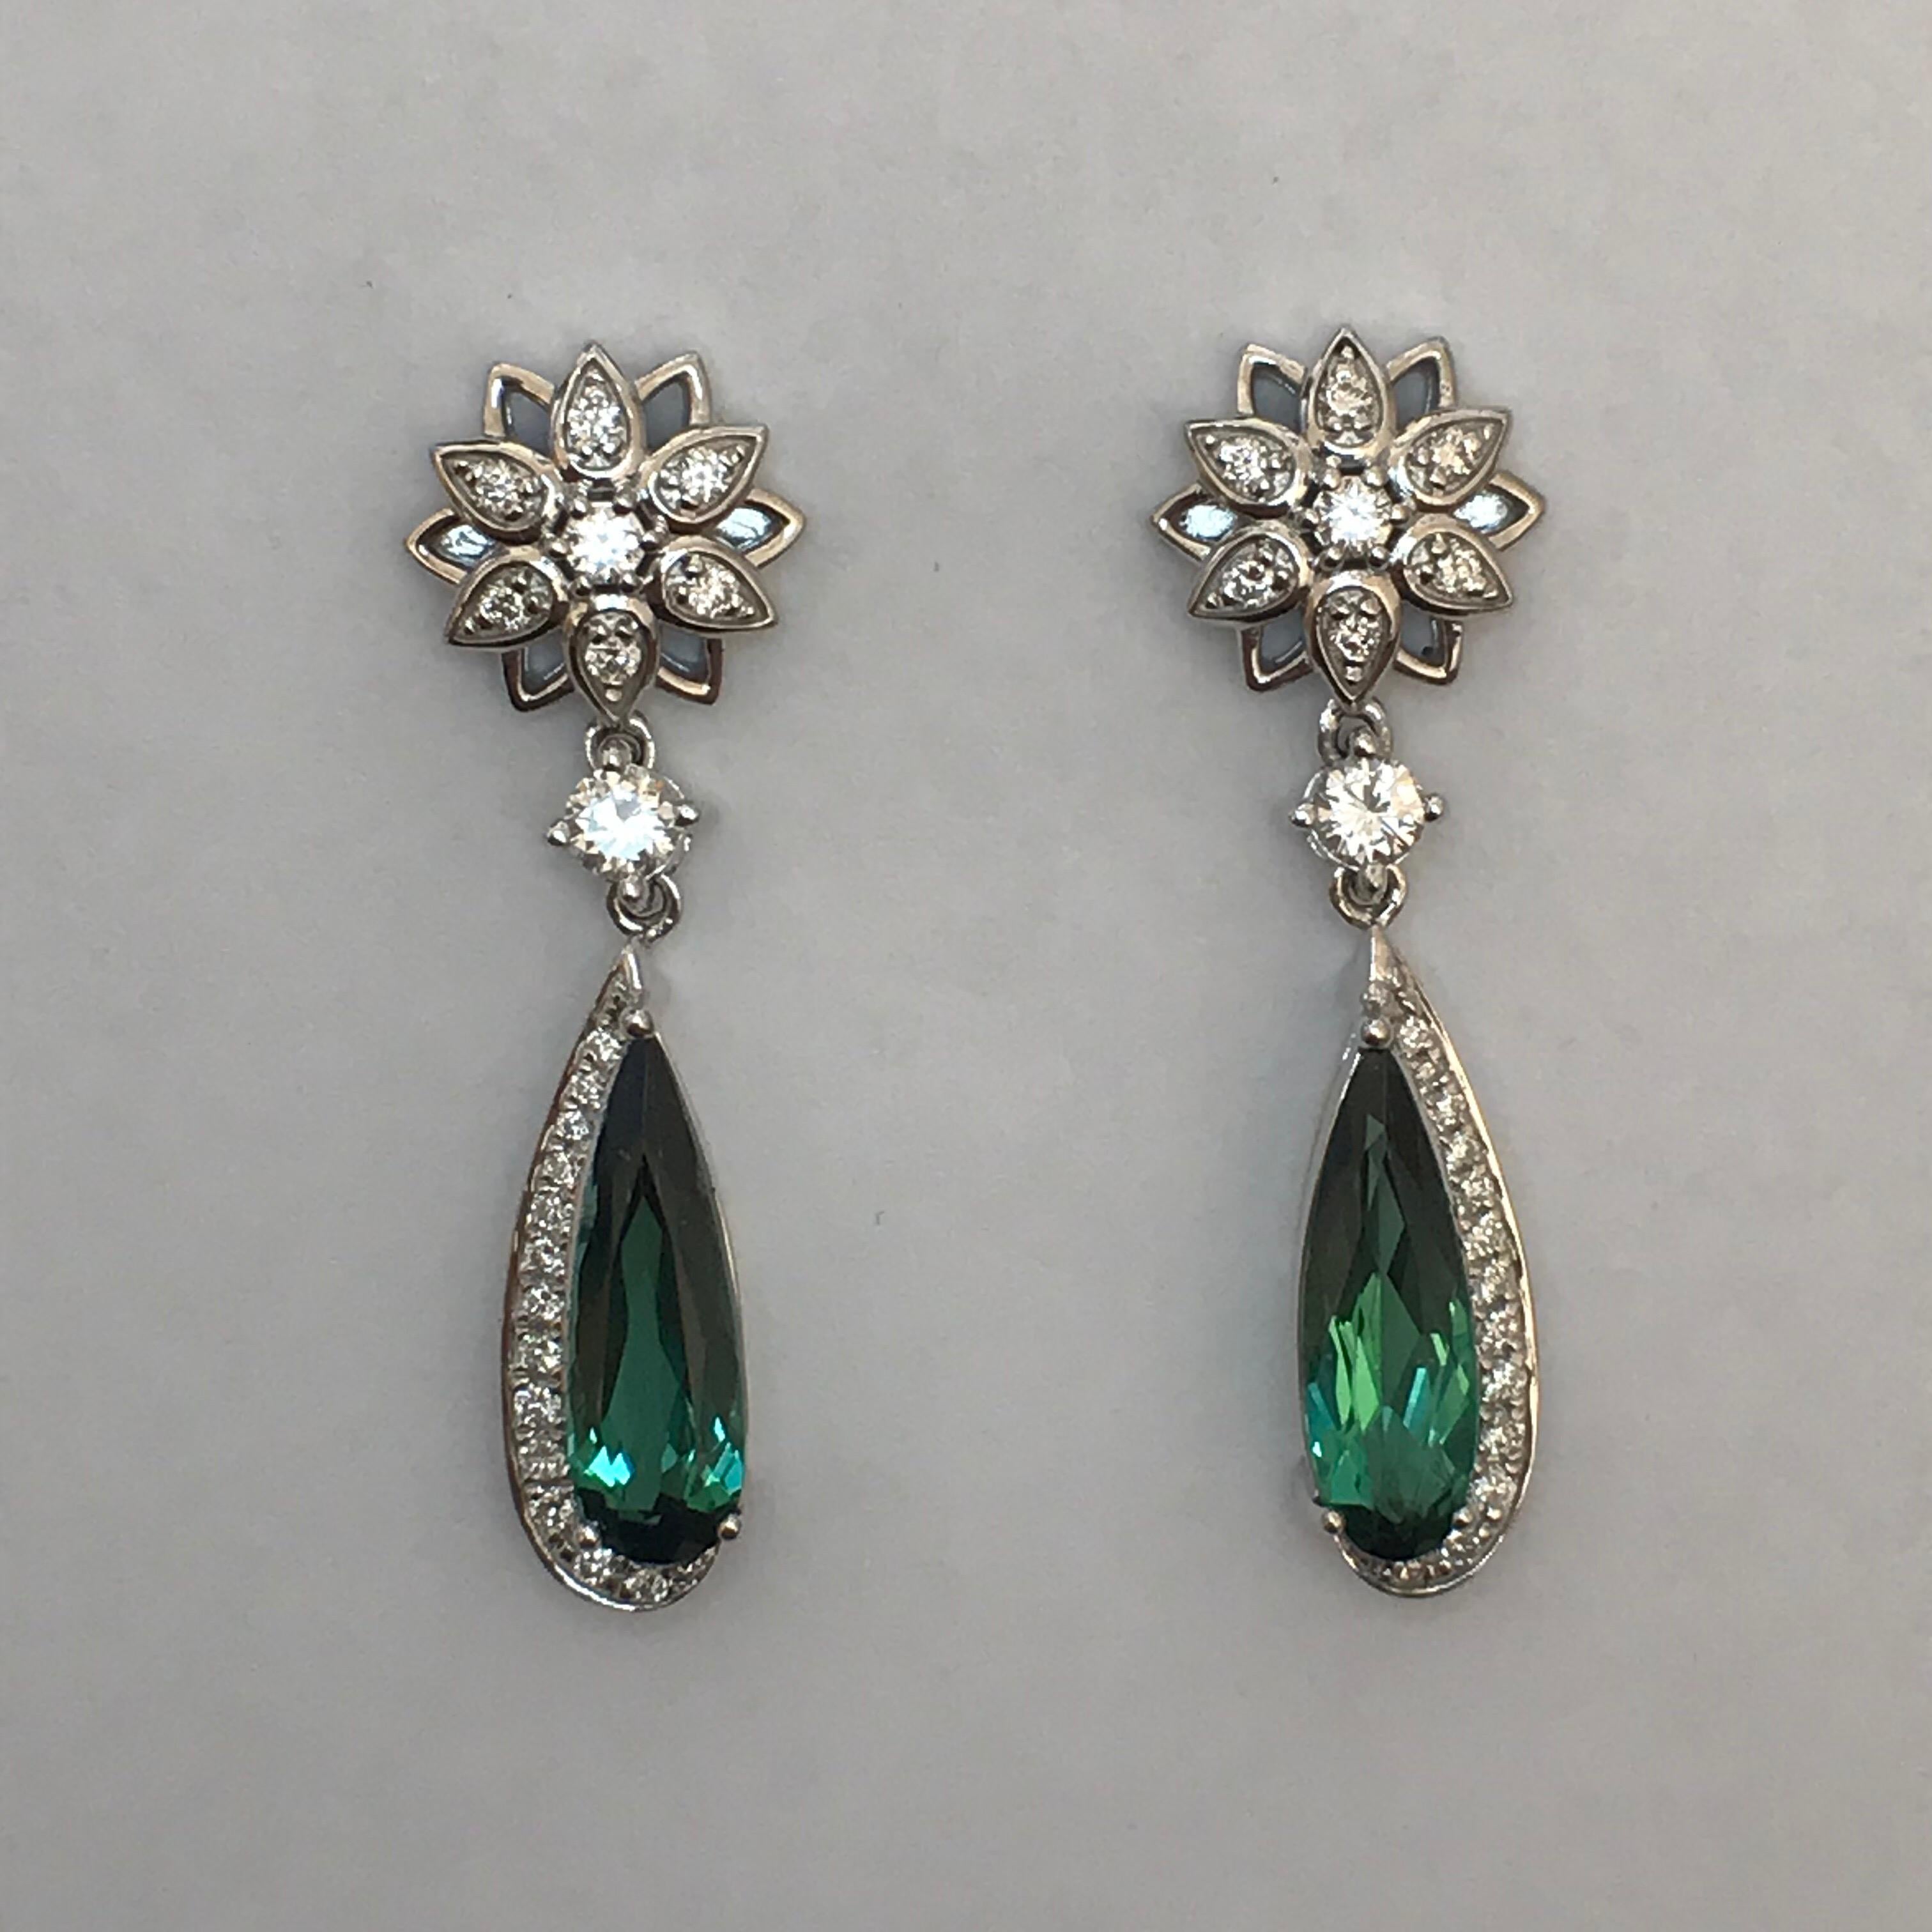 Star-like flowers of alternating diamond and open petals suspend elongated pear-shaped green tourmalines cradled in hook-shaped frames. A diamond is set between the two motifs for additional length and movement.

Elongated Pear-Shaped Green